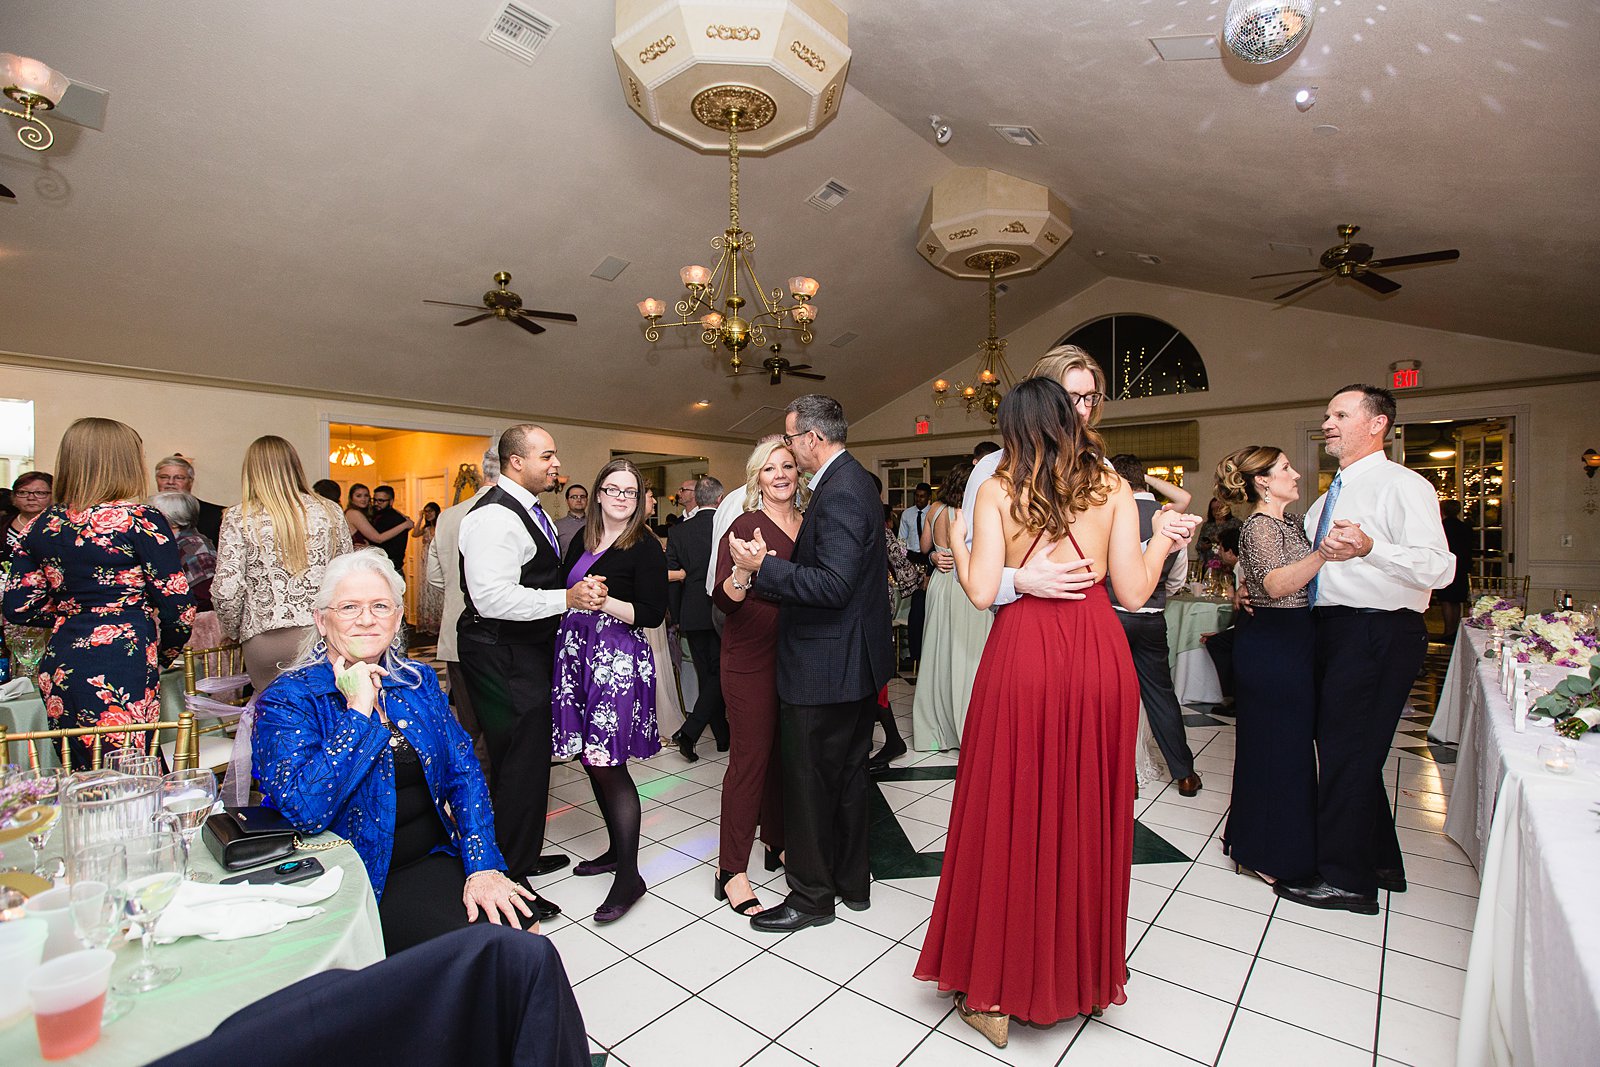 Anniversary Dance at The Wright House wedding reception by Mesa wedding photographer PMA Photography.